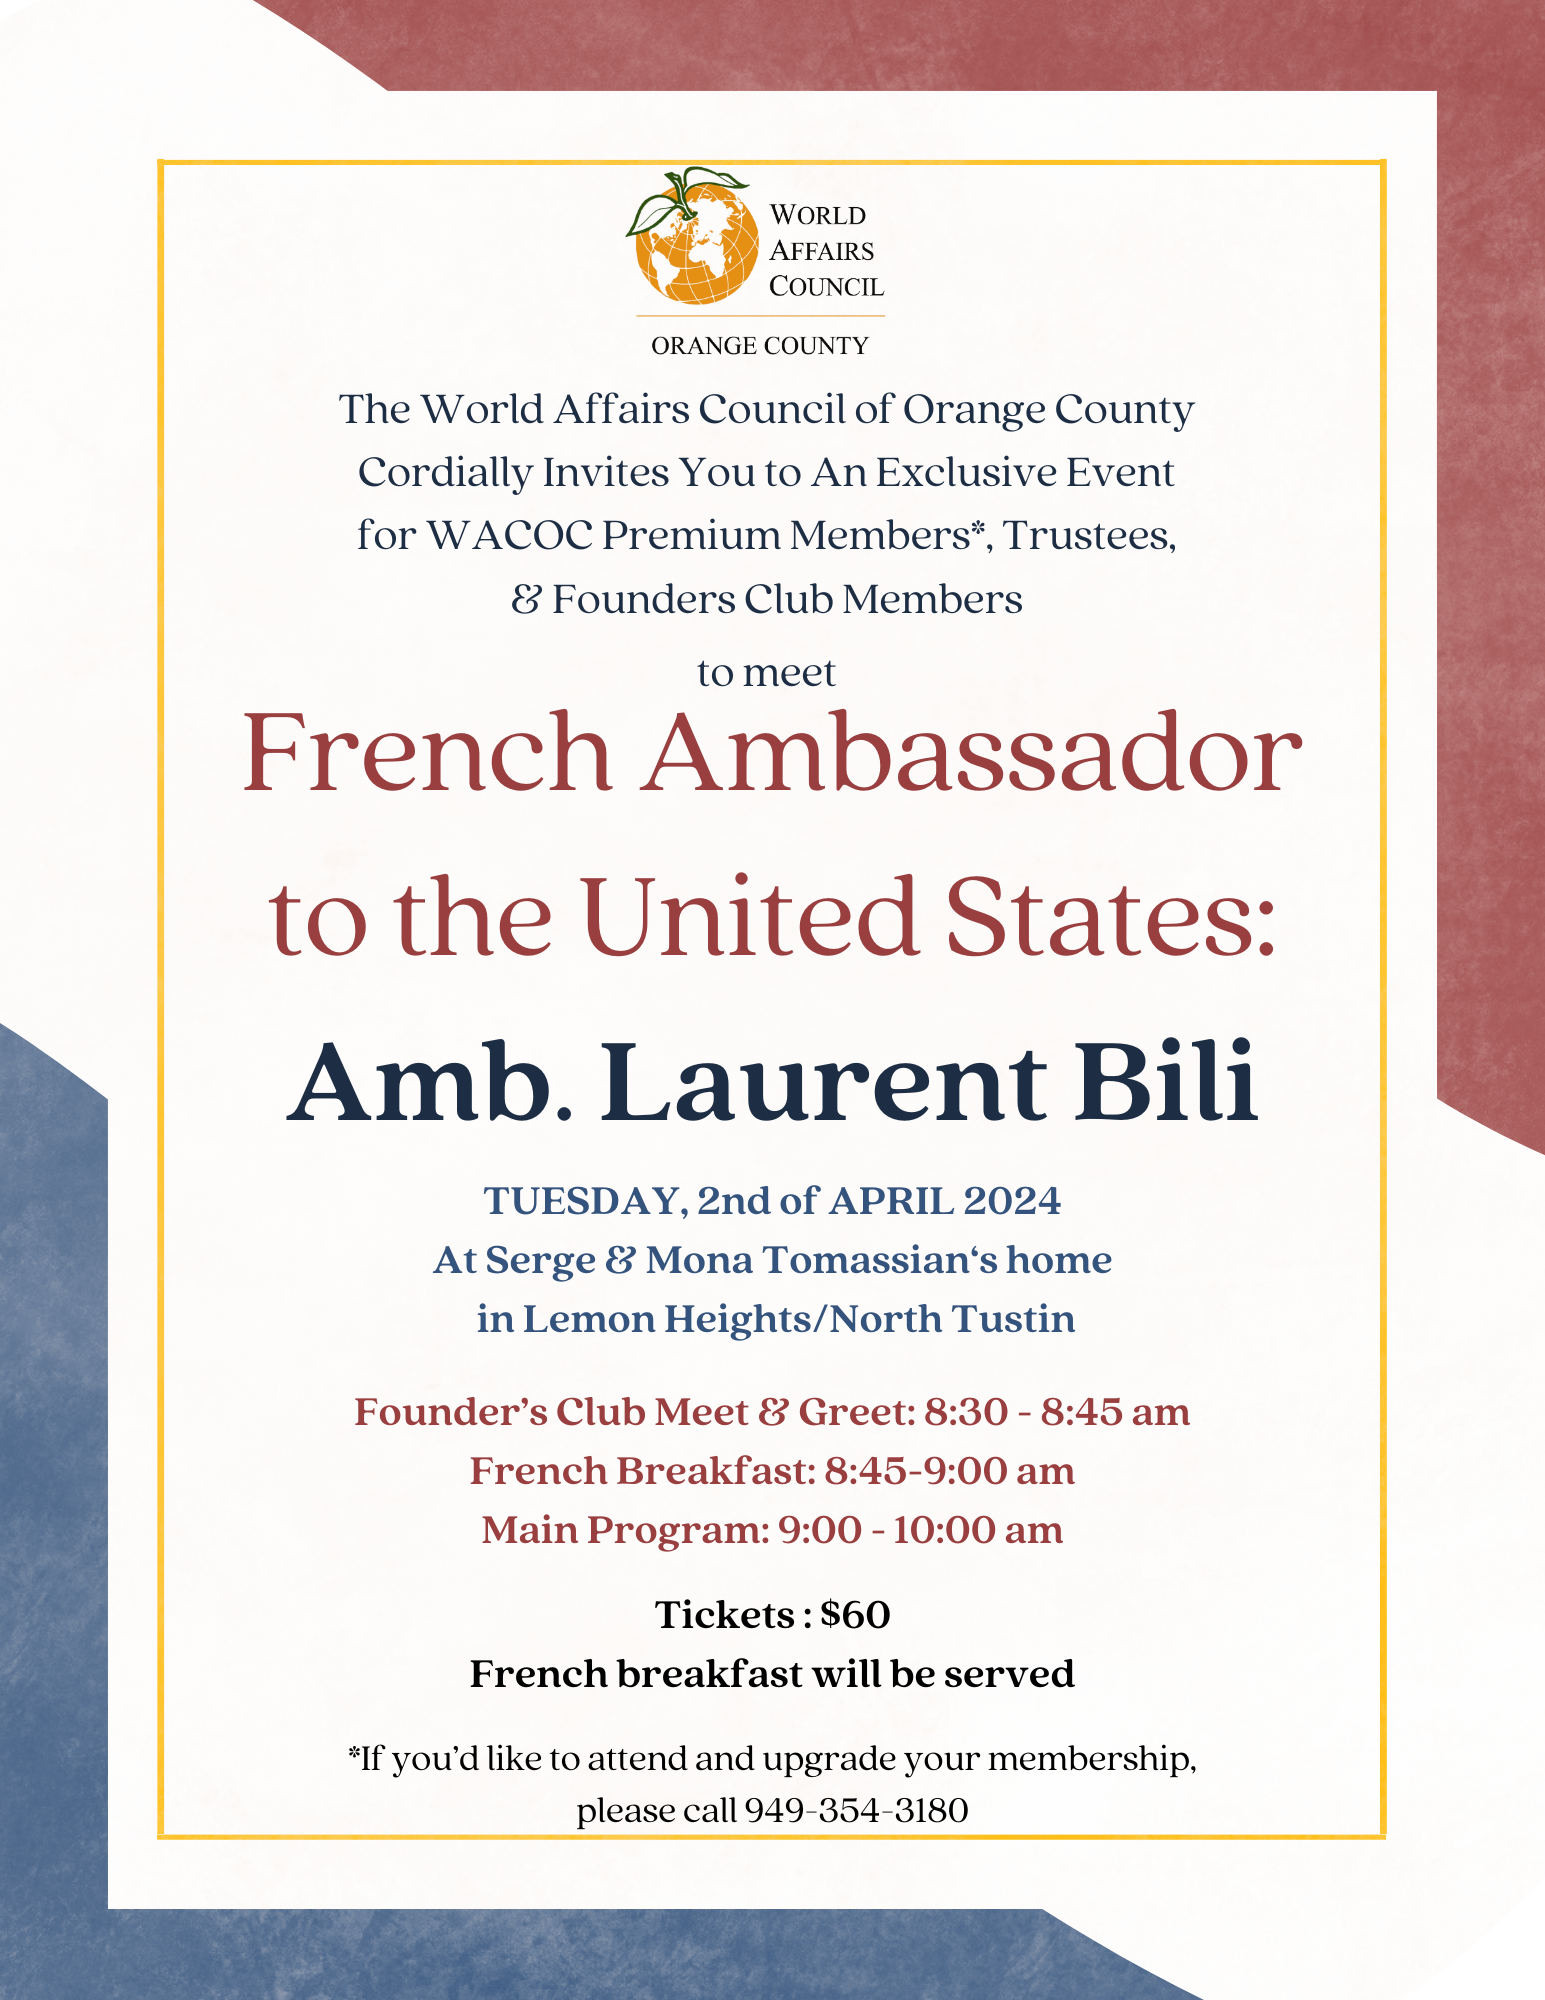 An Exclusive Event with French Ambassador to the U.S., Laurent Bili